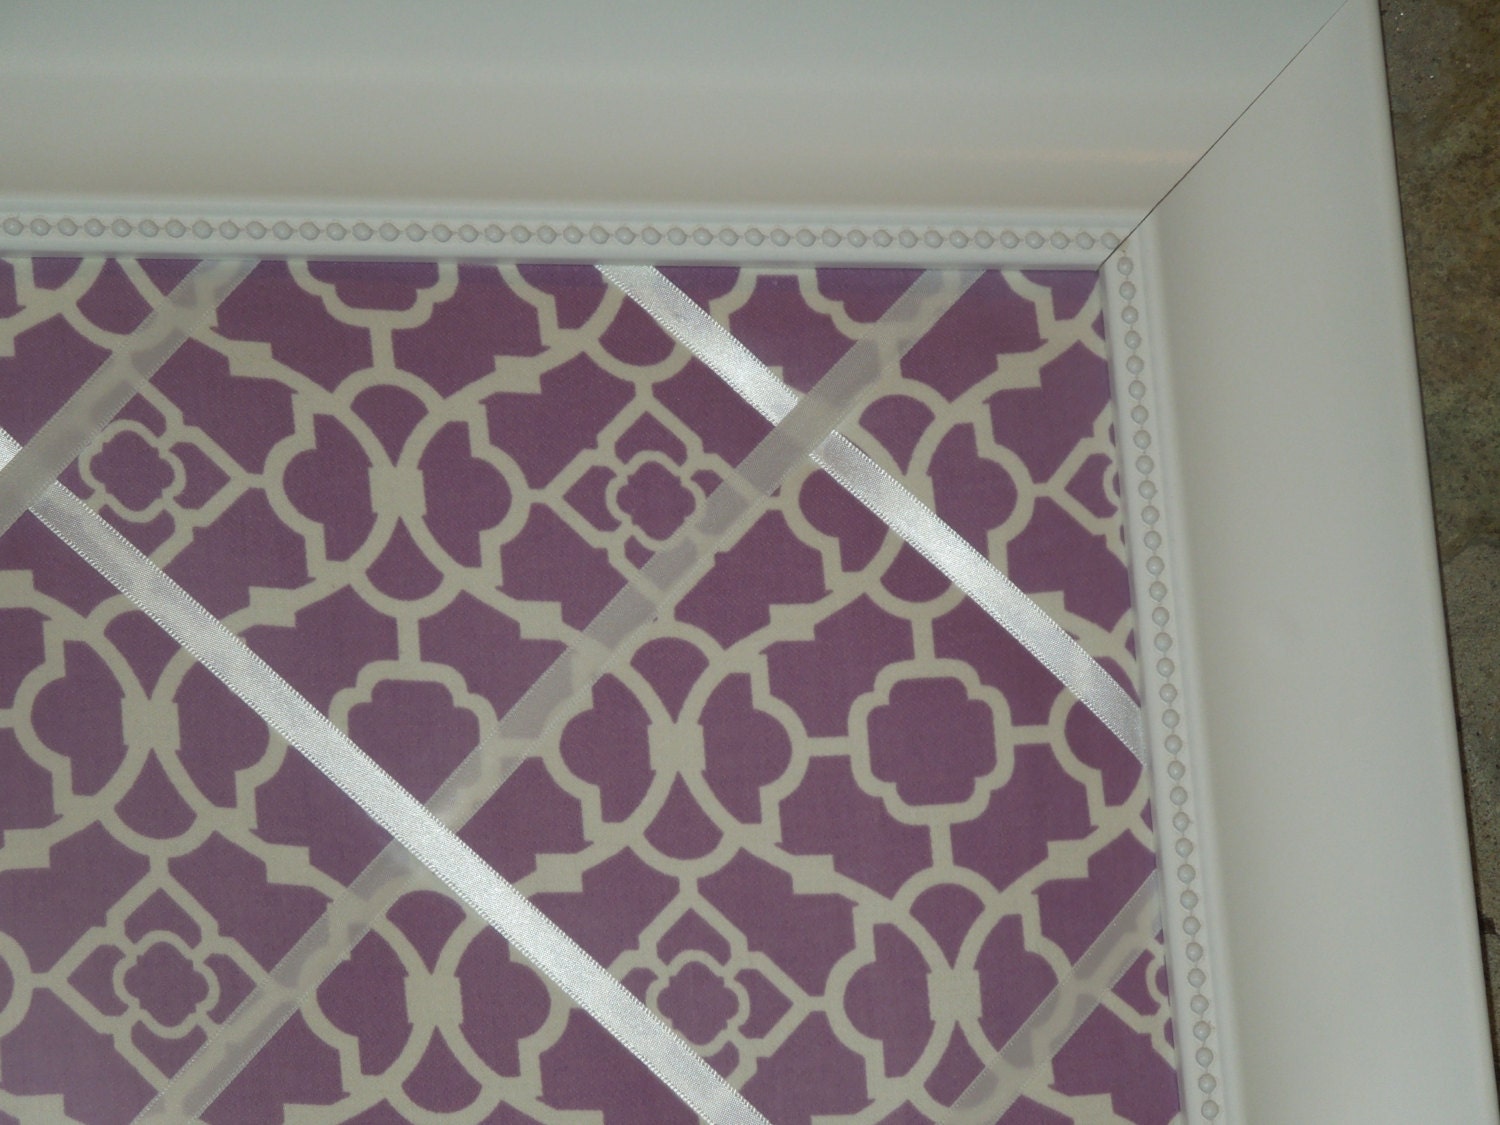 Framed fabric memo board 16x20 Purple and white fabric with